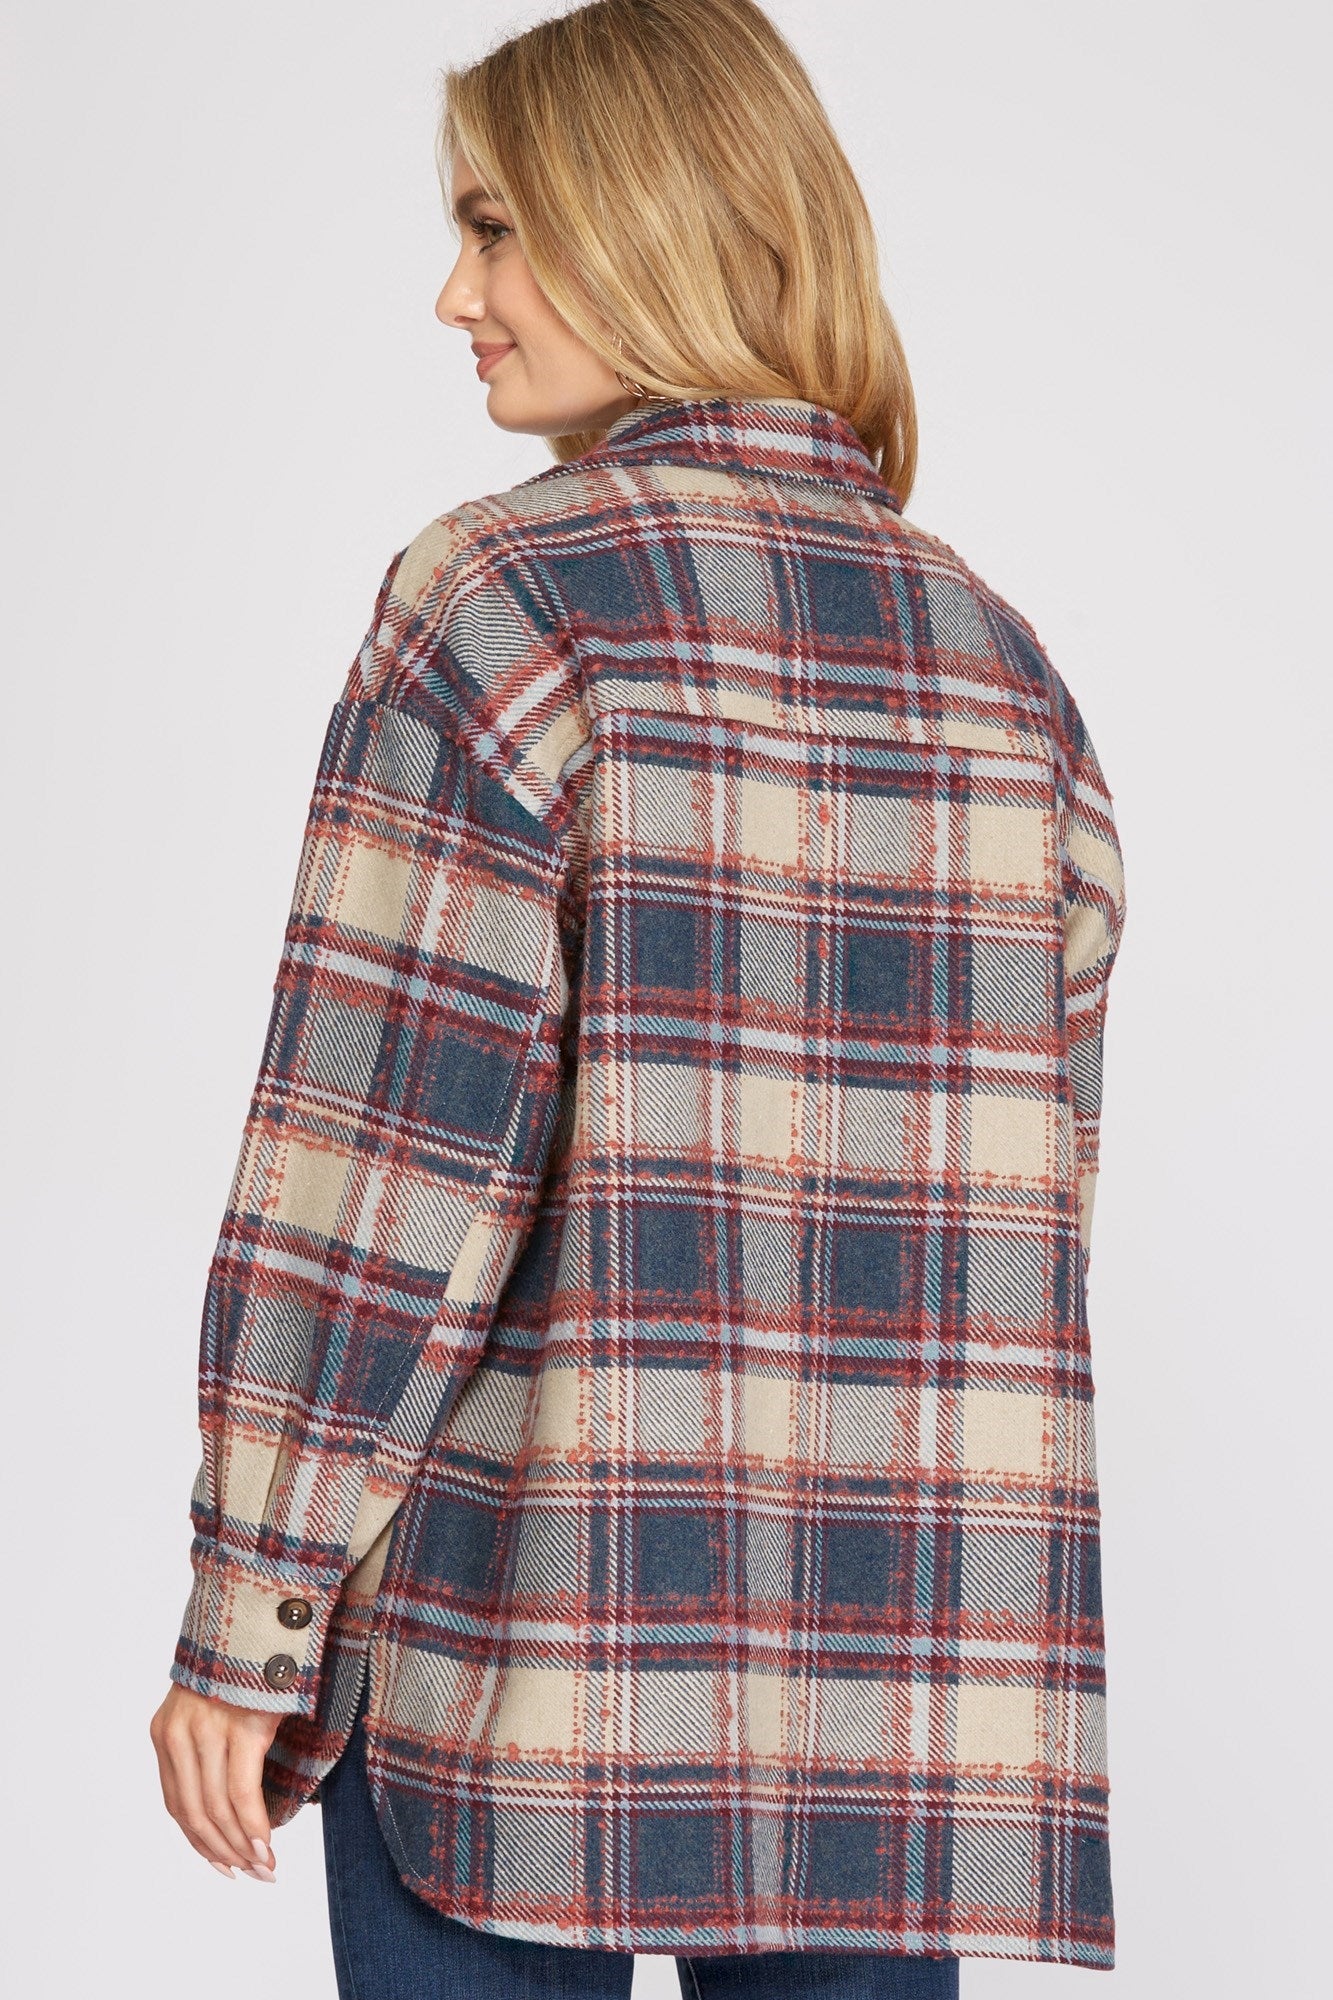 Woven Plaid Shacket - Dusty Blue-Shacket- Hometown Style HTS, women's in store and online boutique located in Ingersoll, Ontario